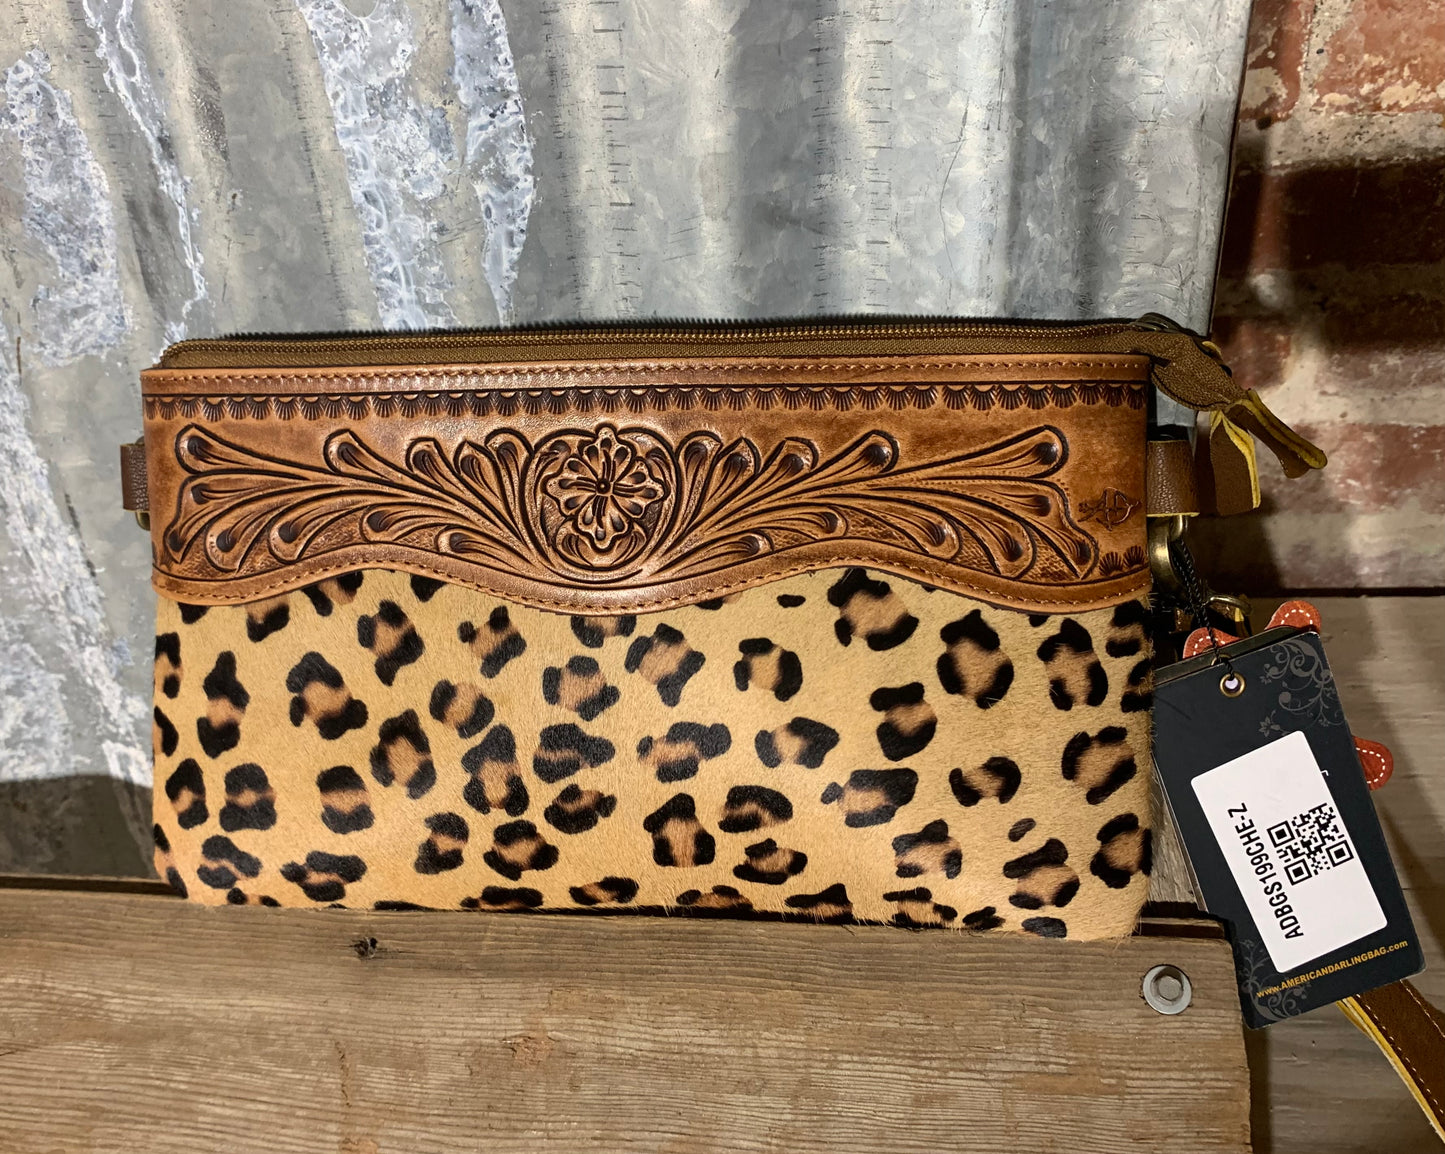 American Darling Hide Leopard Tooled Small Purse